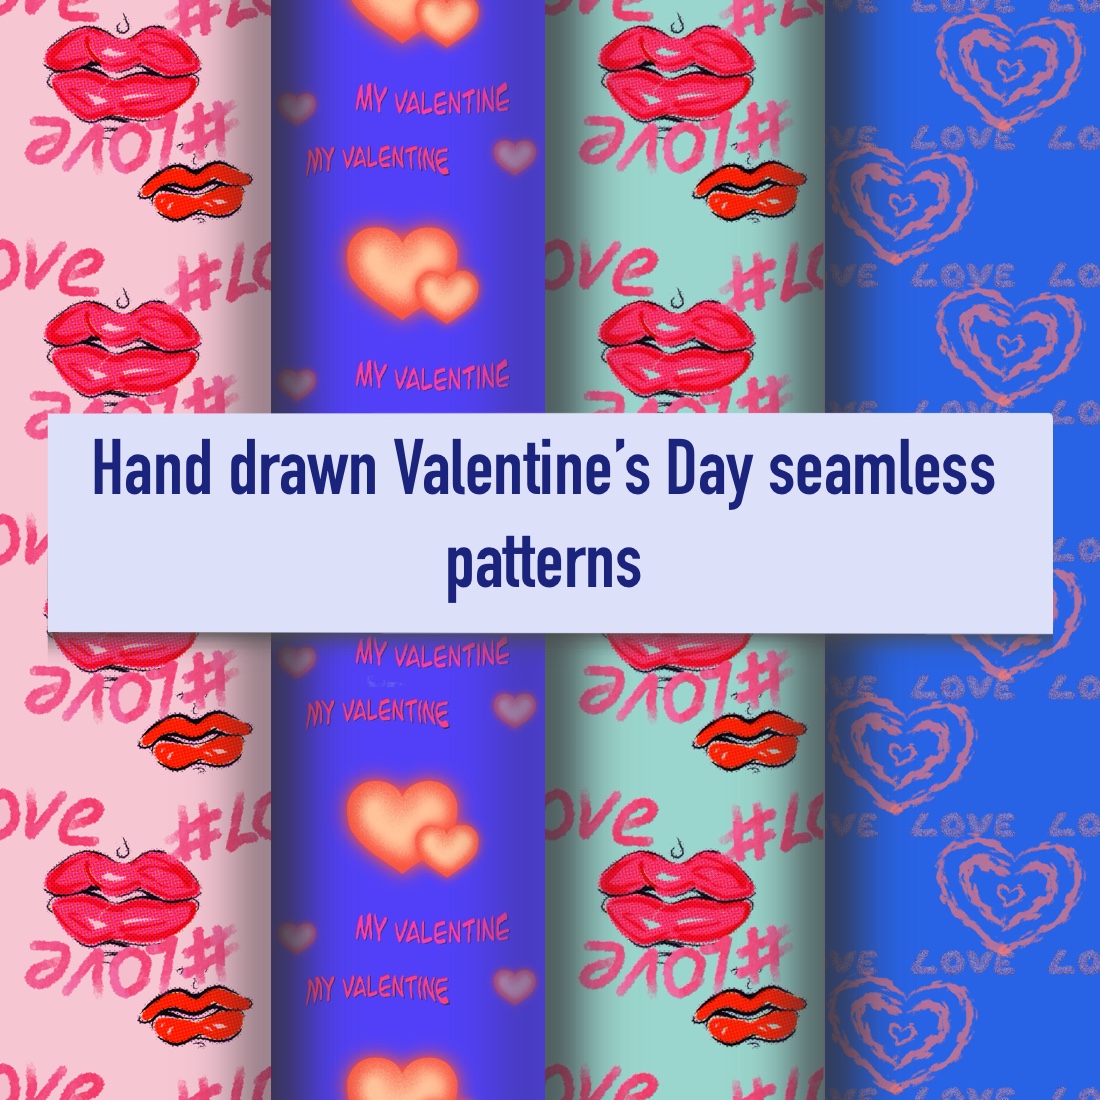 Hand Drawn Valentine's Day Seamless Patterns cover image.